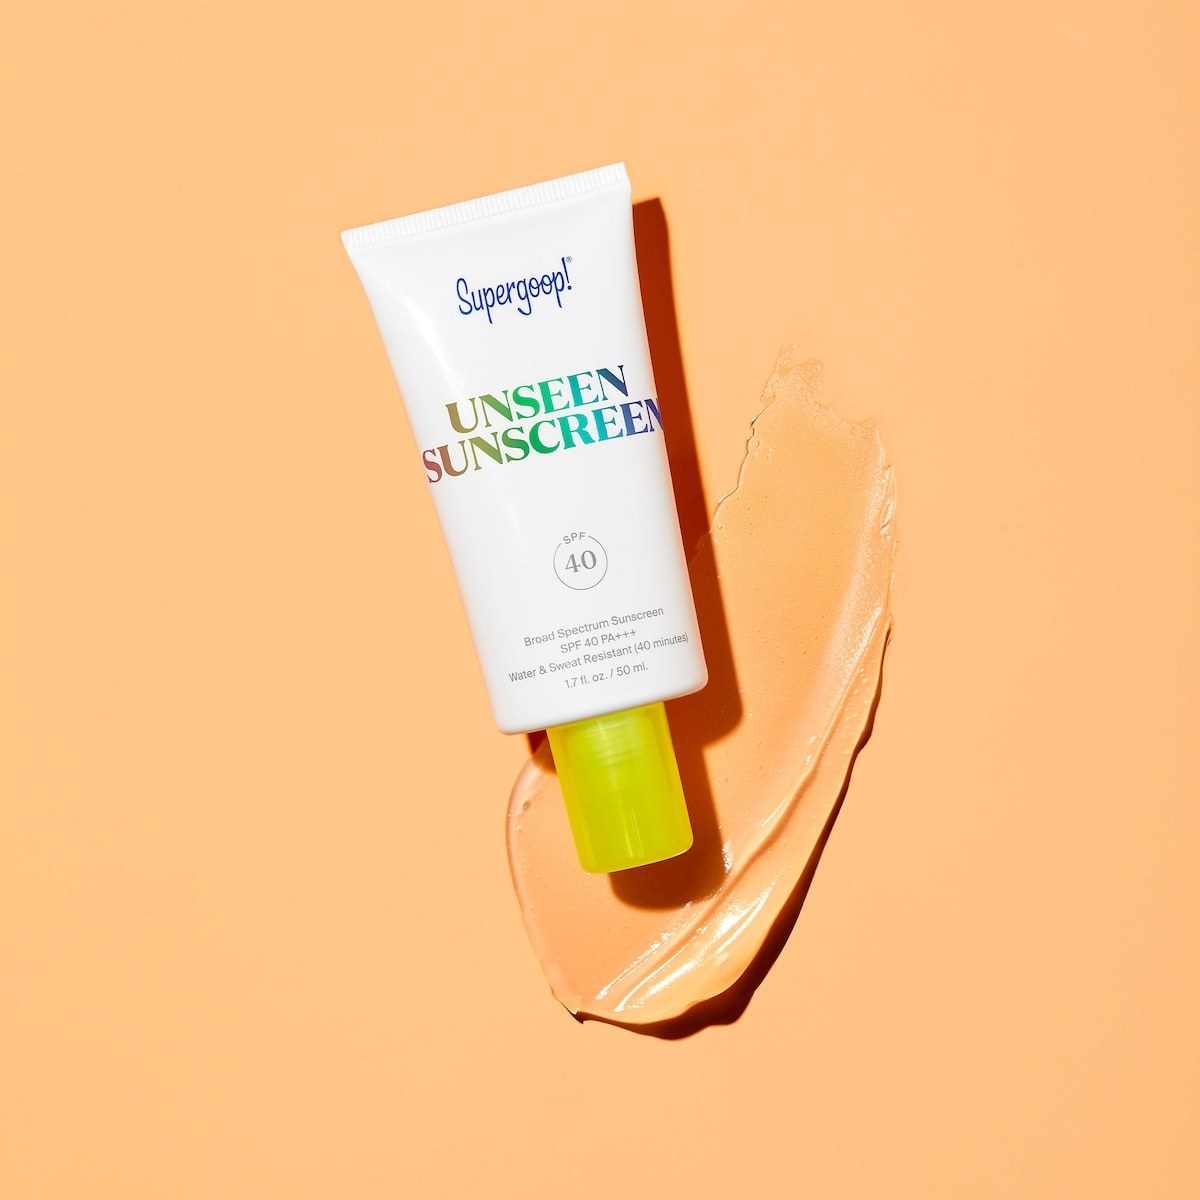 The sunscreen which is SPF 40 and clear